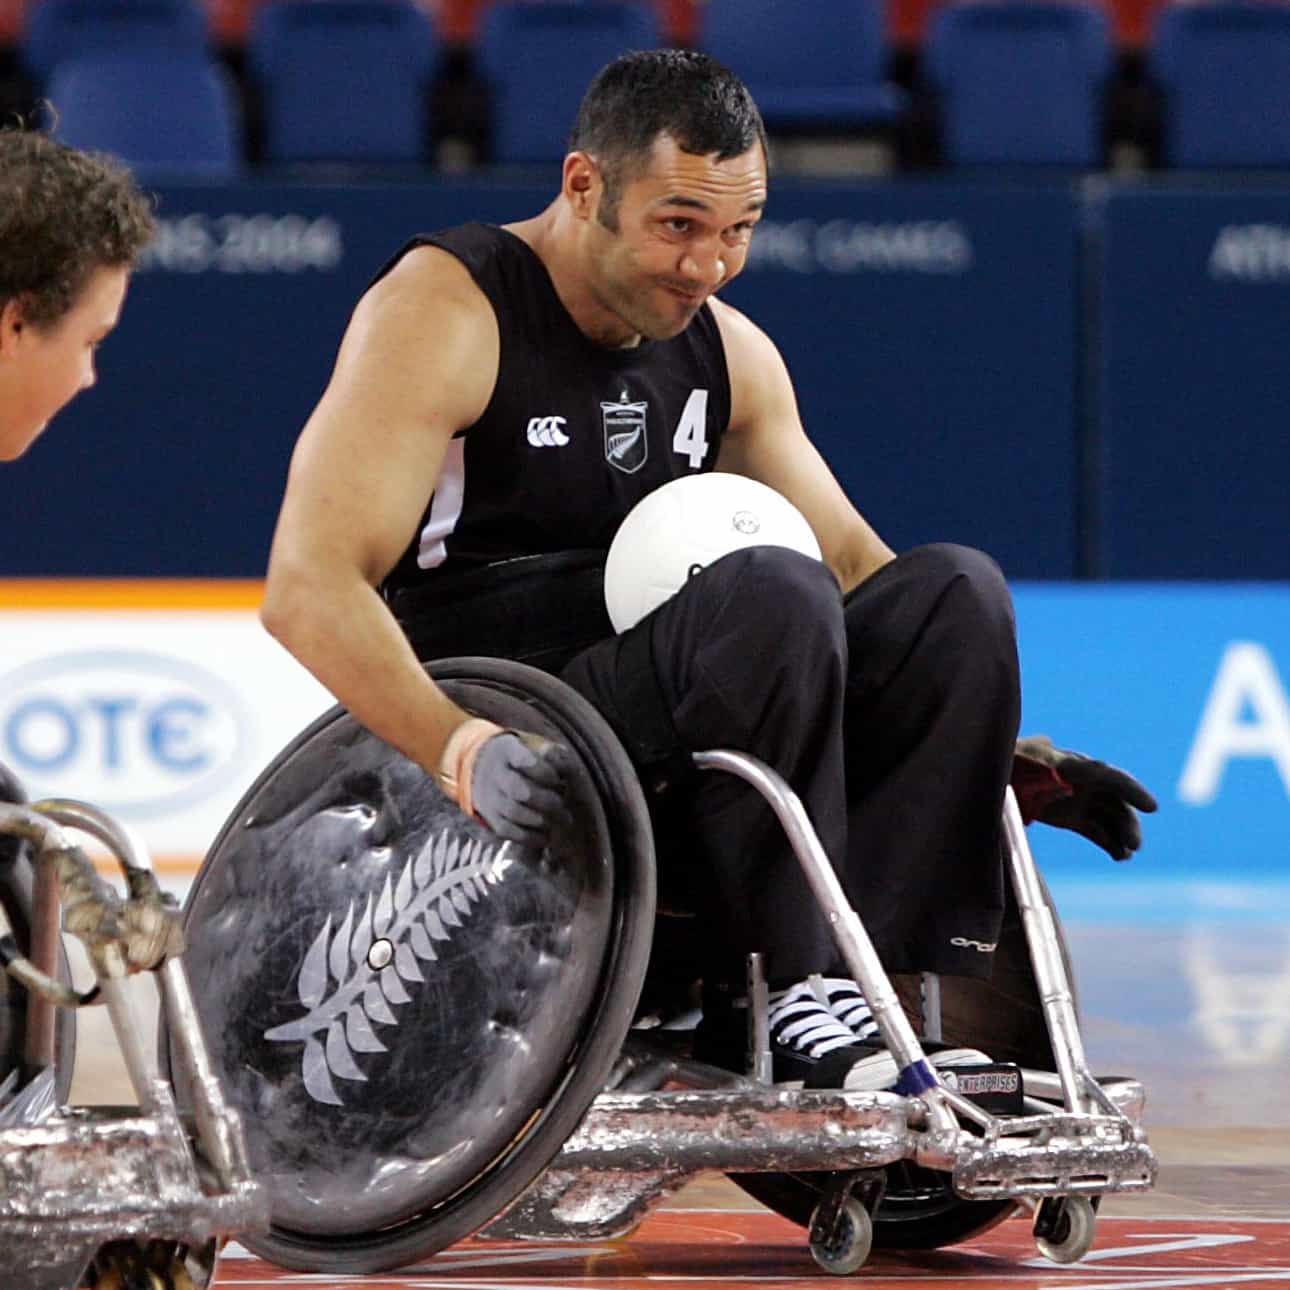 Sholto Taylor during the Wheelchair Rugby match between Australia and New Zealand at the Indoor Arena, Athens, Greece on Sunday 19 September, 2004. The Wheelblacks won the match, 41 - 31.
PHOTO: Hannah Johnston/PHOTOSPORT